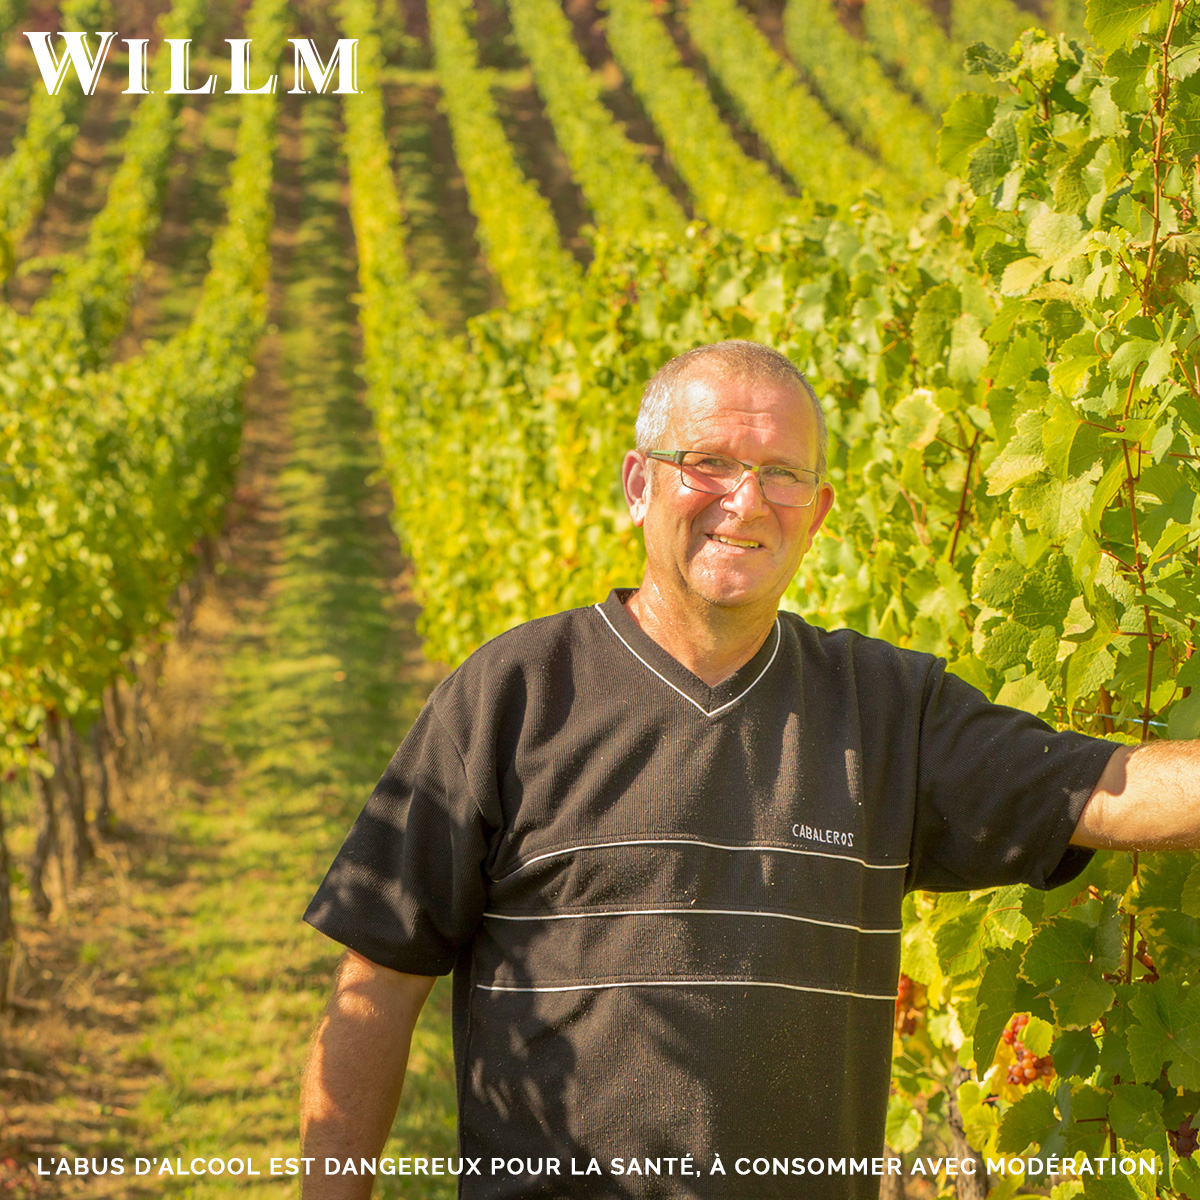 Meet Jean-Marc Ostertag, one of our #winegrowers. He has been cultivating only #Gewurztraminer grapes since the early 2000s. Owning over 99 square meters in the renowned Clos Gaensbrœnnel, he is a living Maison Willm icon! #drinkalsace #alsacerocks #alsacewillm #alsace